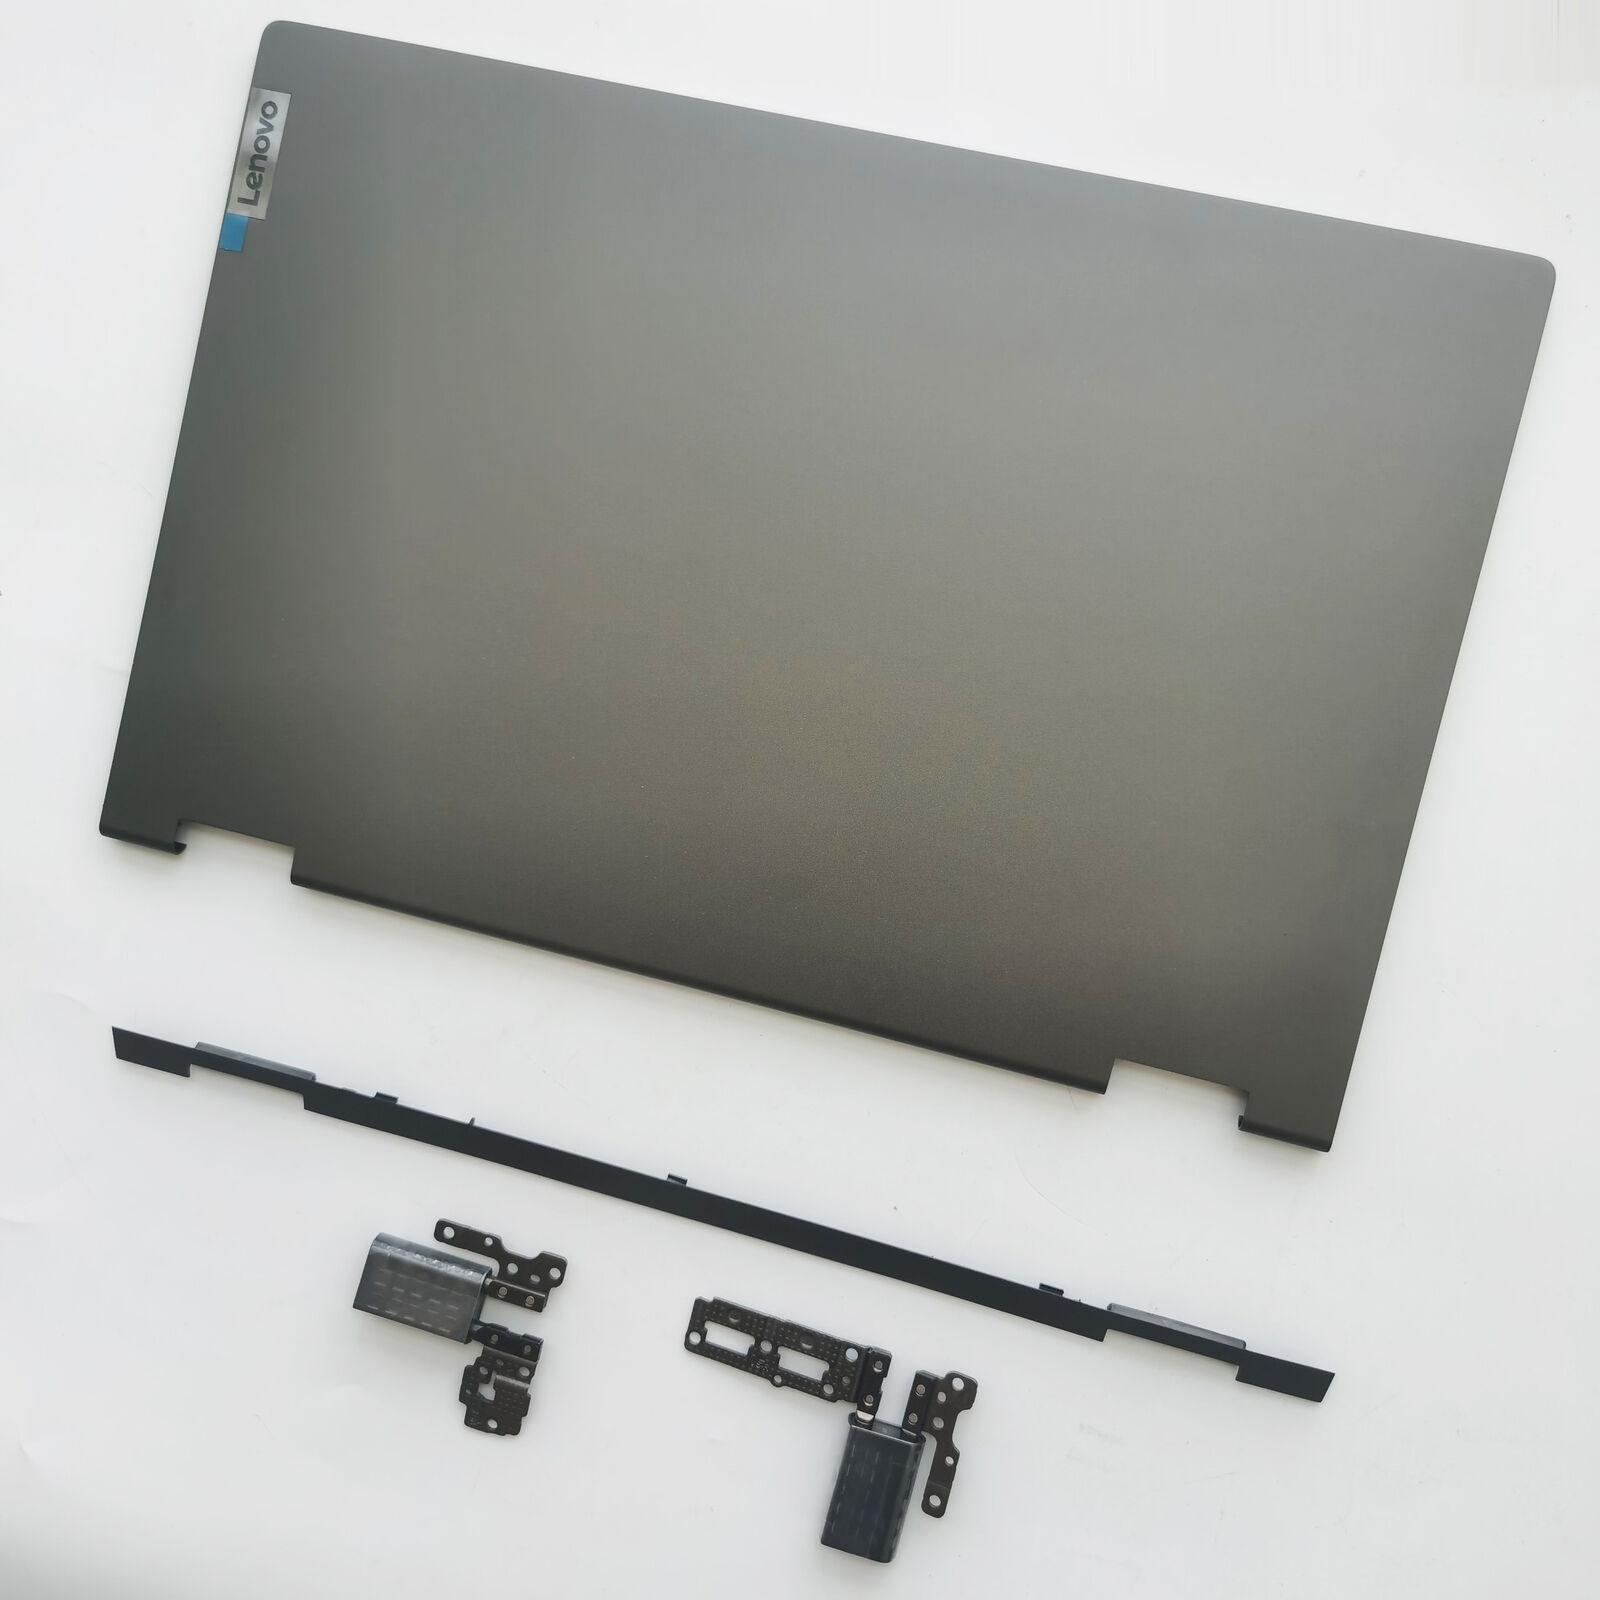 LCD Back Cover For Lenovo Ideapad Flex 5-14IIL05 14ARE05 14ITL05 Metal Version